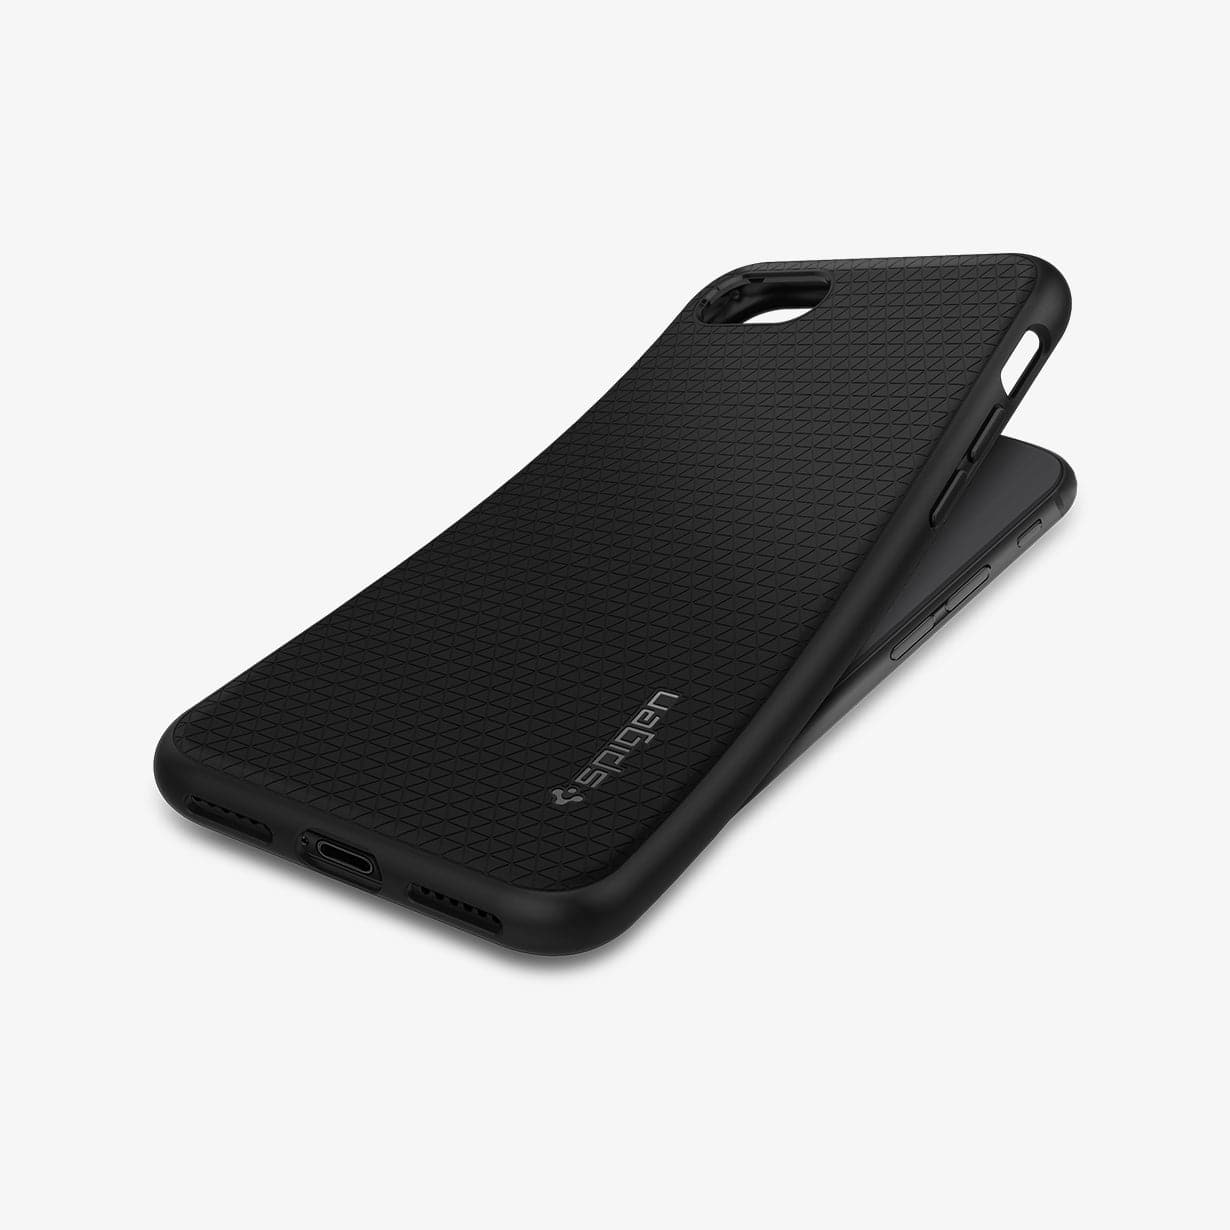 042CS20511 - iPhone 7 Case Liquid Air in black showing the back and side with case bending away from the device